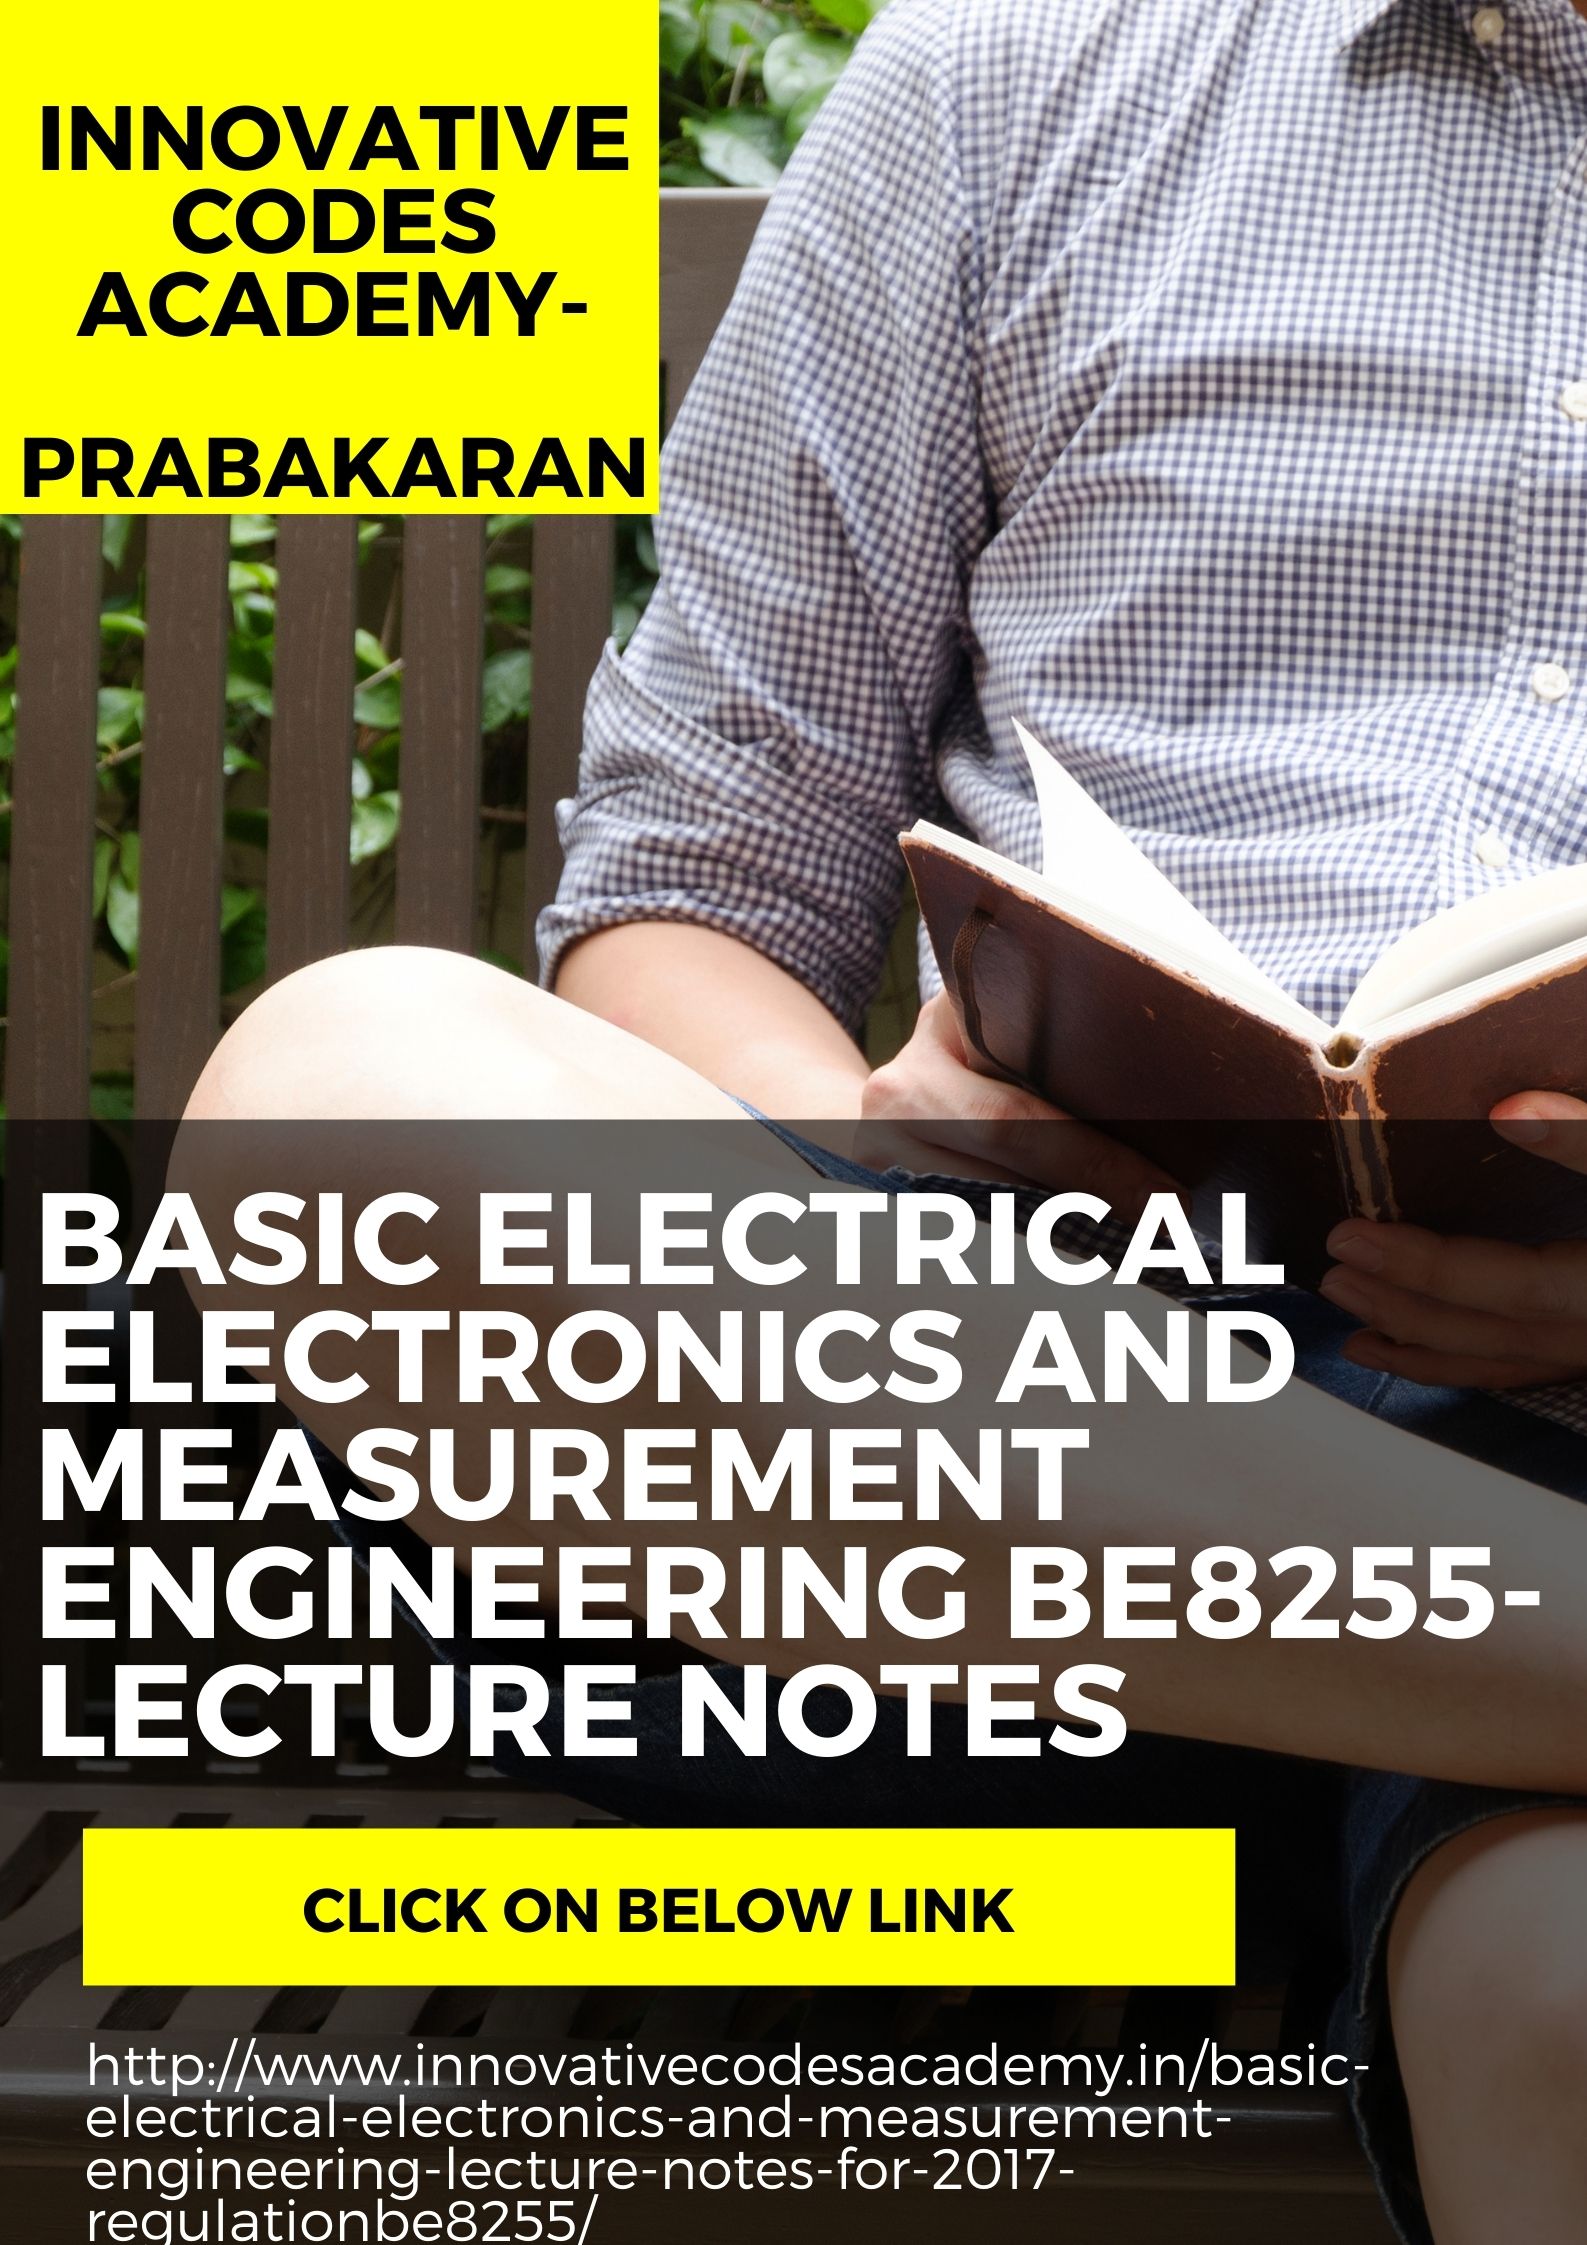 BASIC ELECTRICAL, ELECTRONICS AND MEASUREMENT ENGINEERING Lecture Notes for 2017 Regulation(BE8255 )